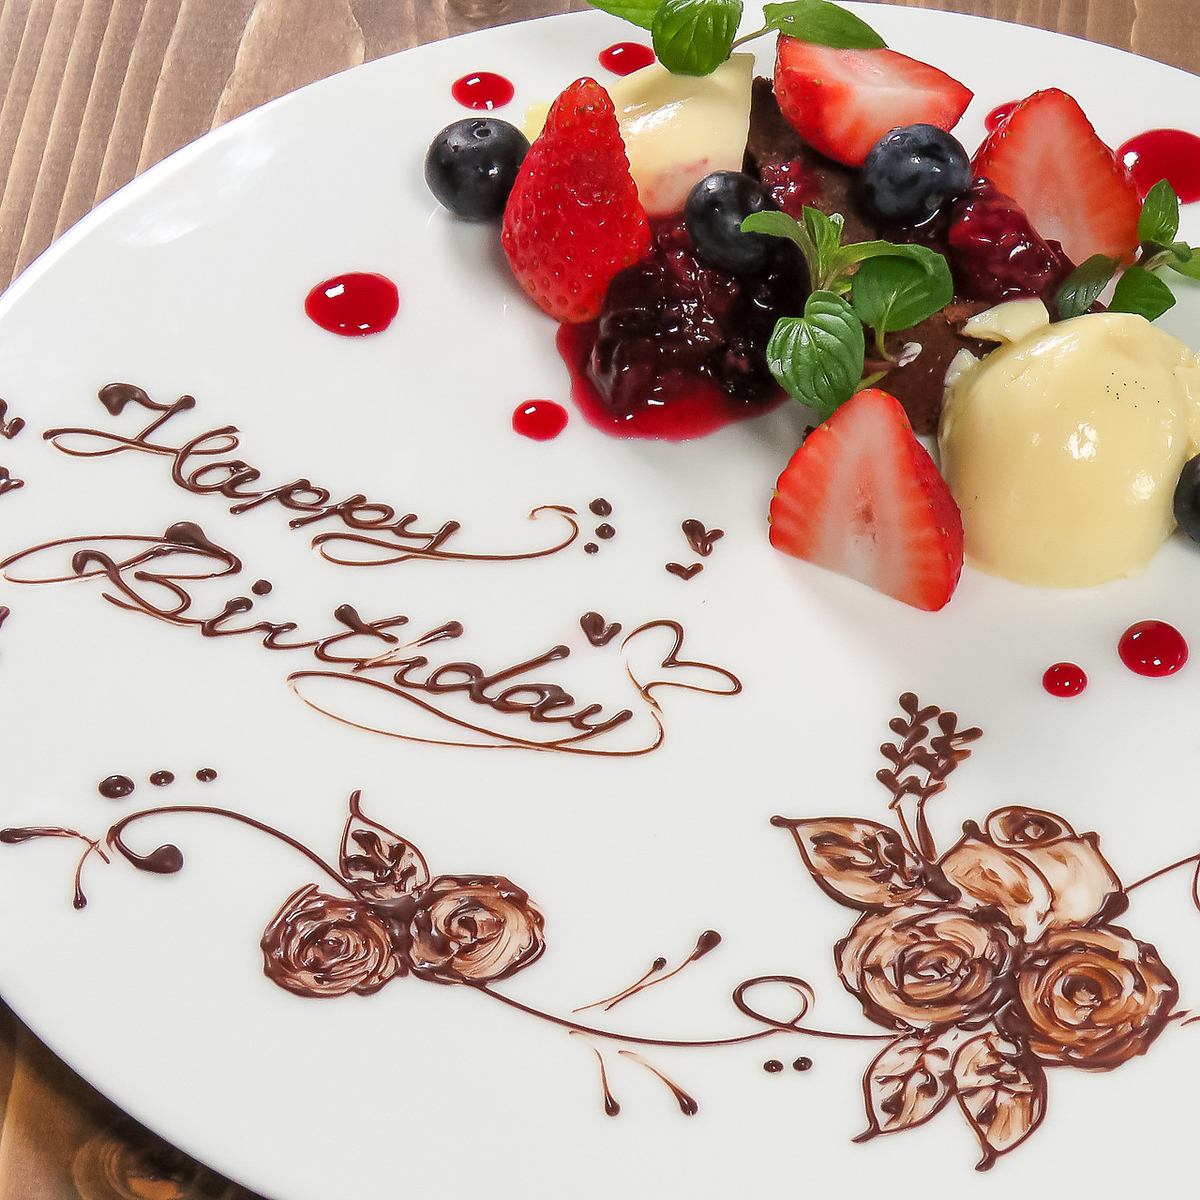 We will prepare an anniversary plate just for you.1,500 yen including tax!